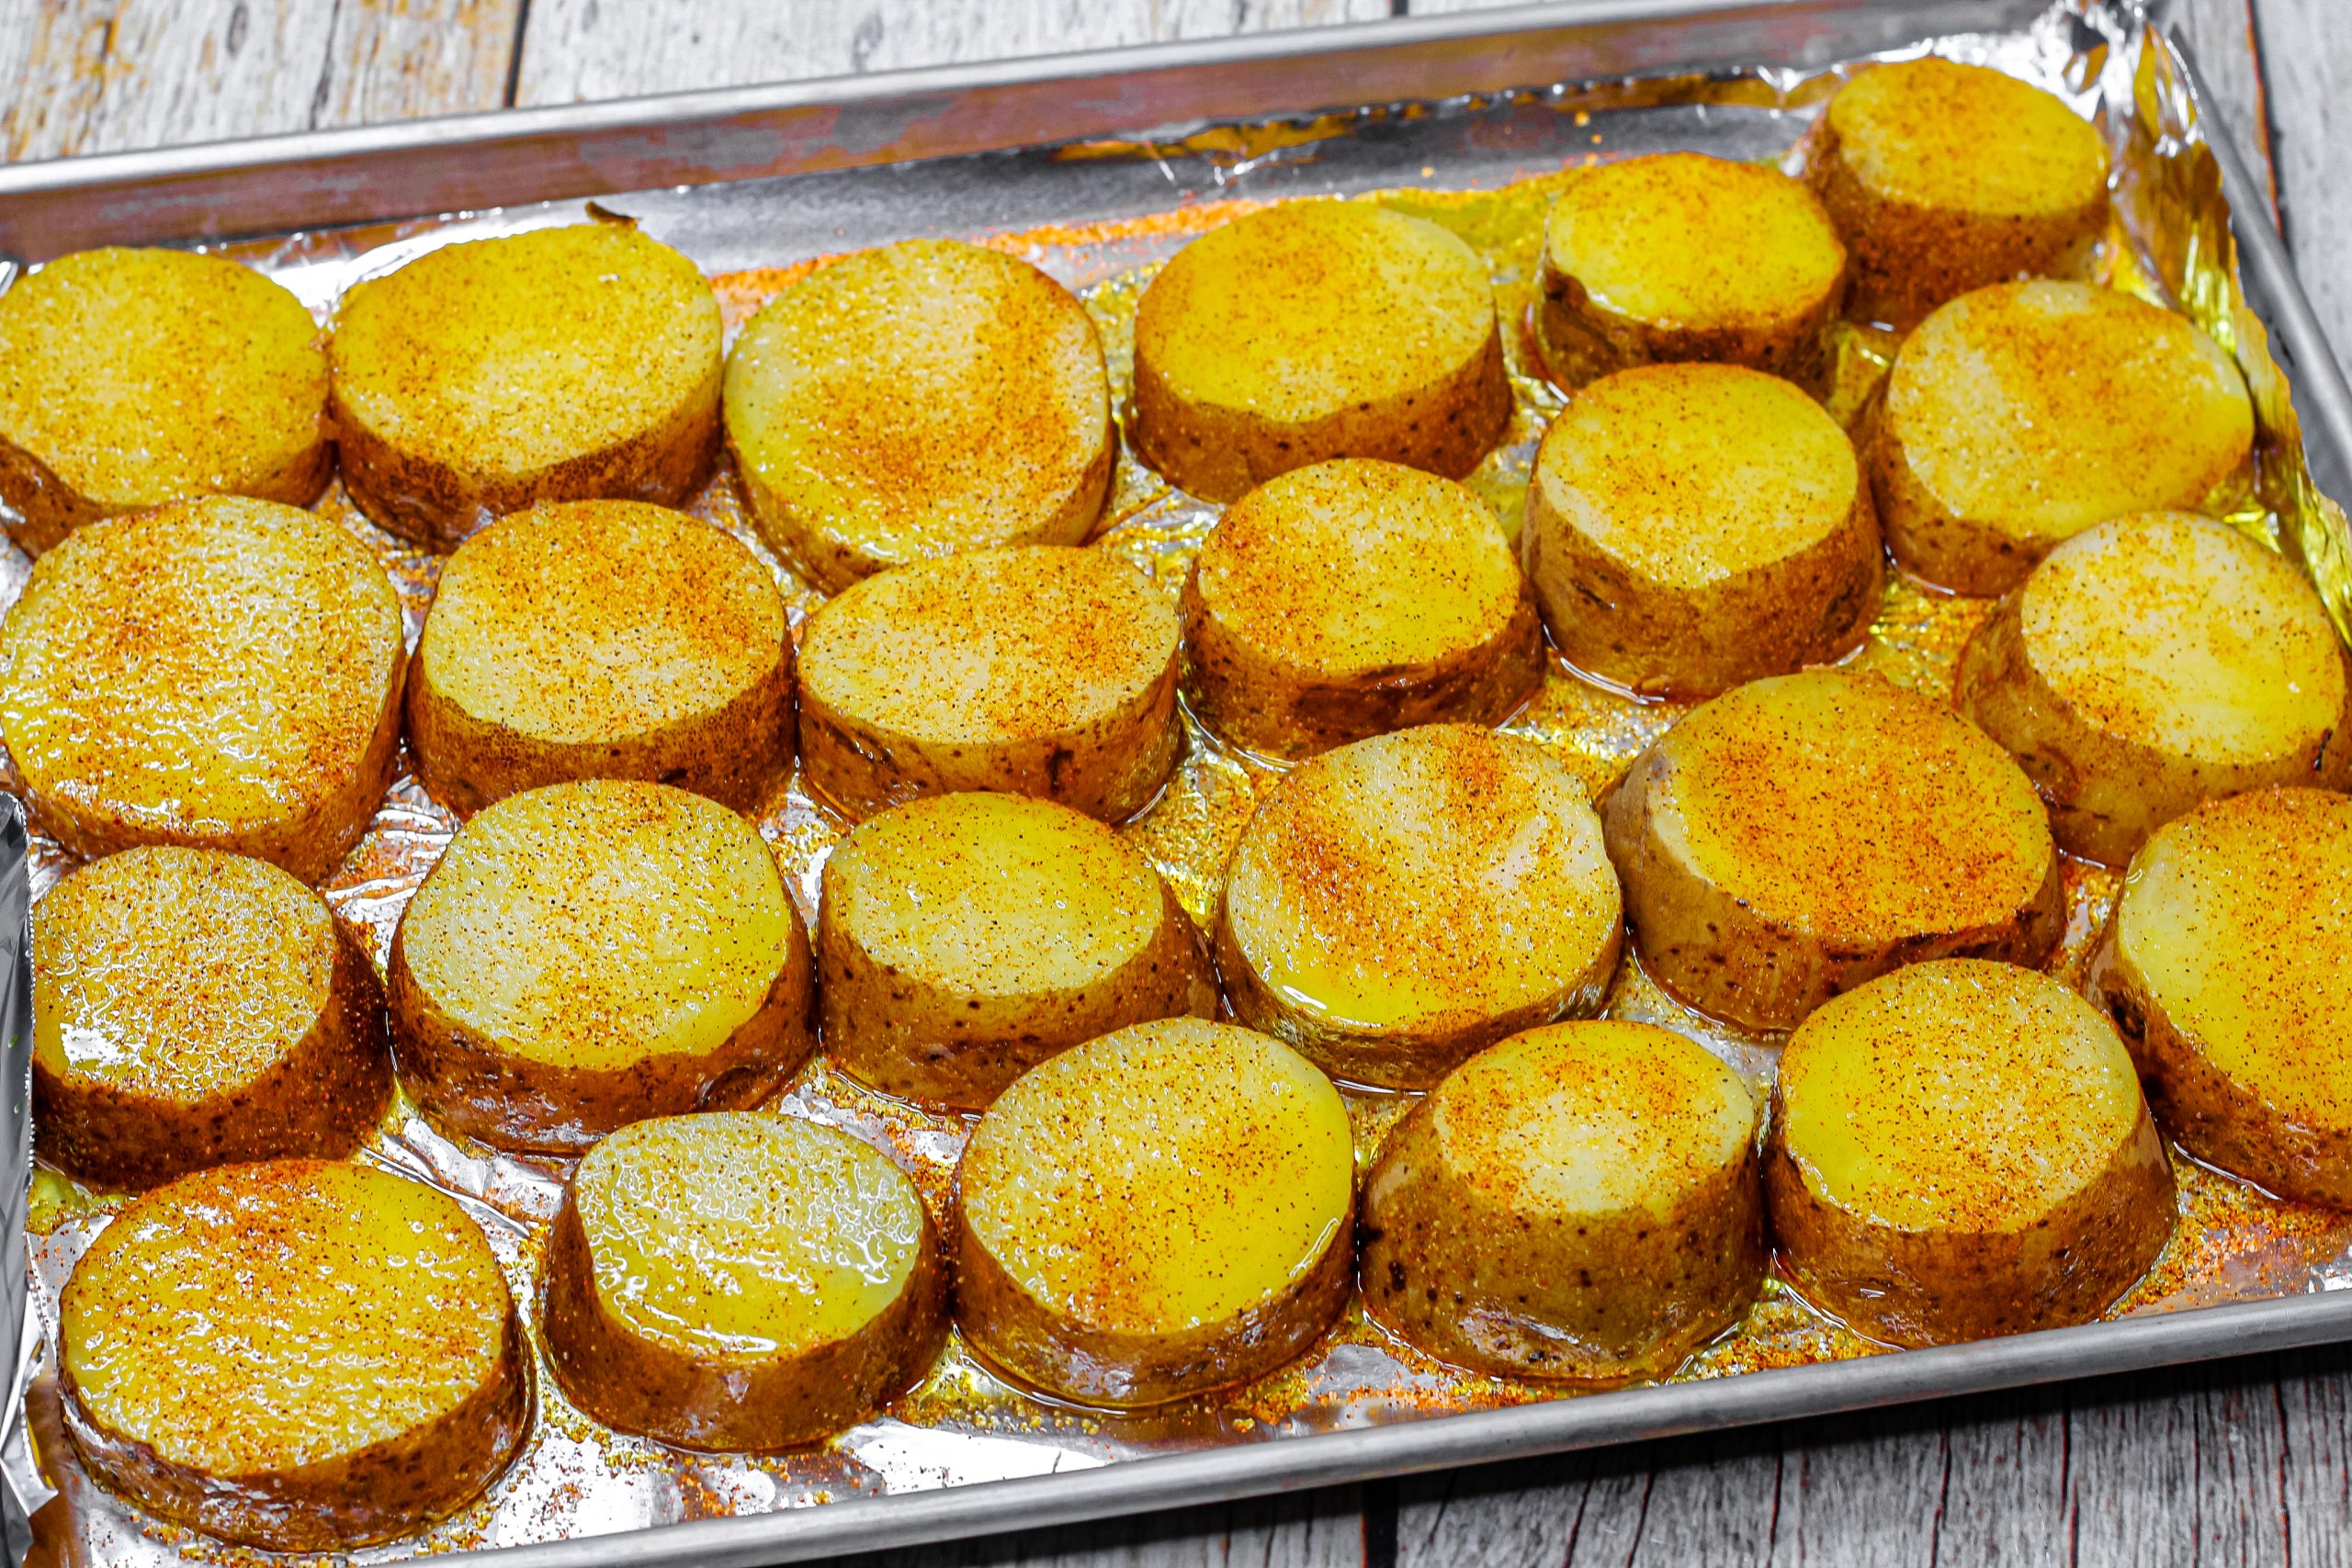  Place the potatoes onto the foil-lined baking sheet.